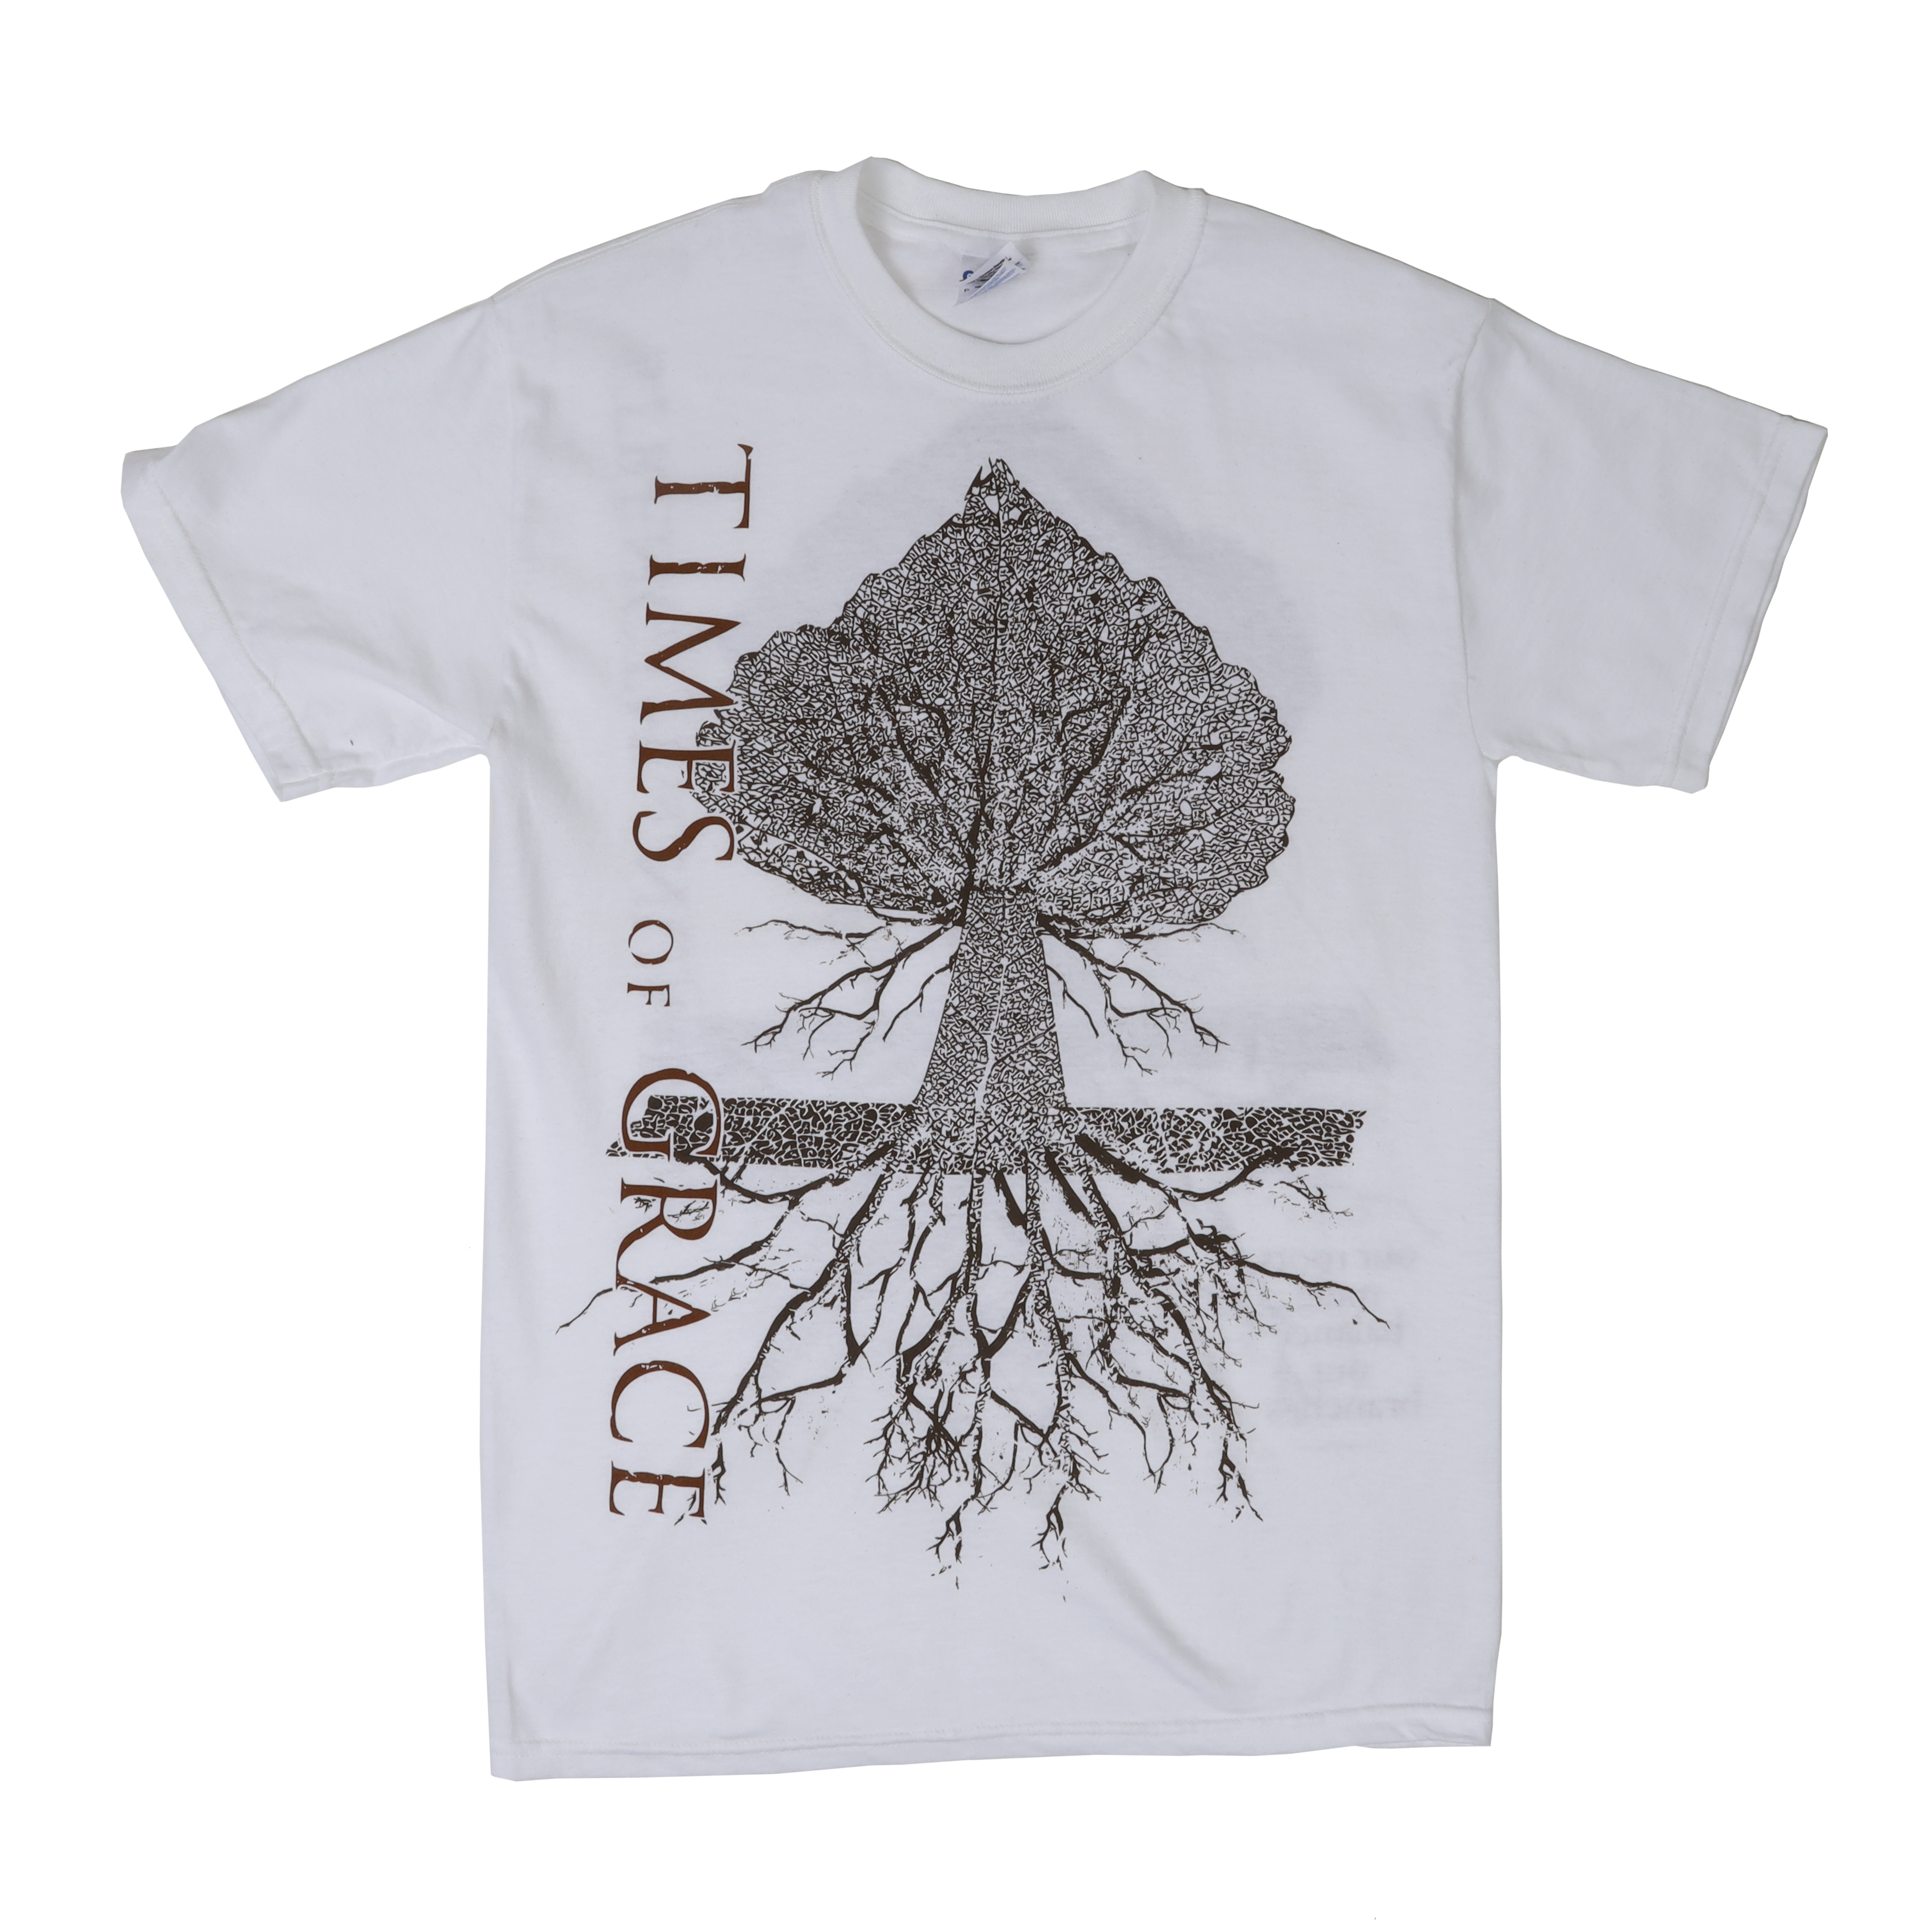 Strength In Numbers T-Shirt